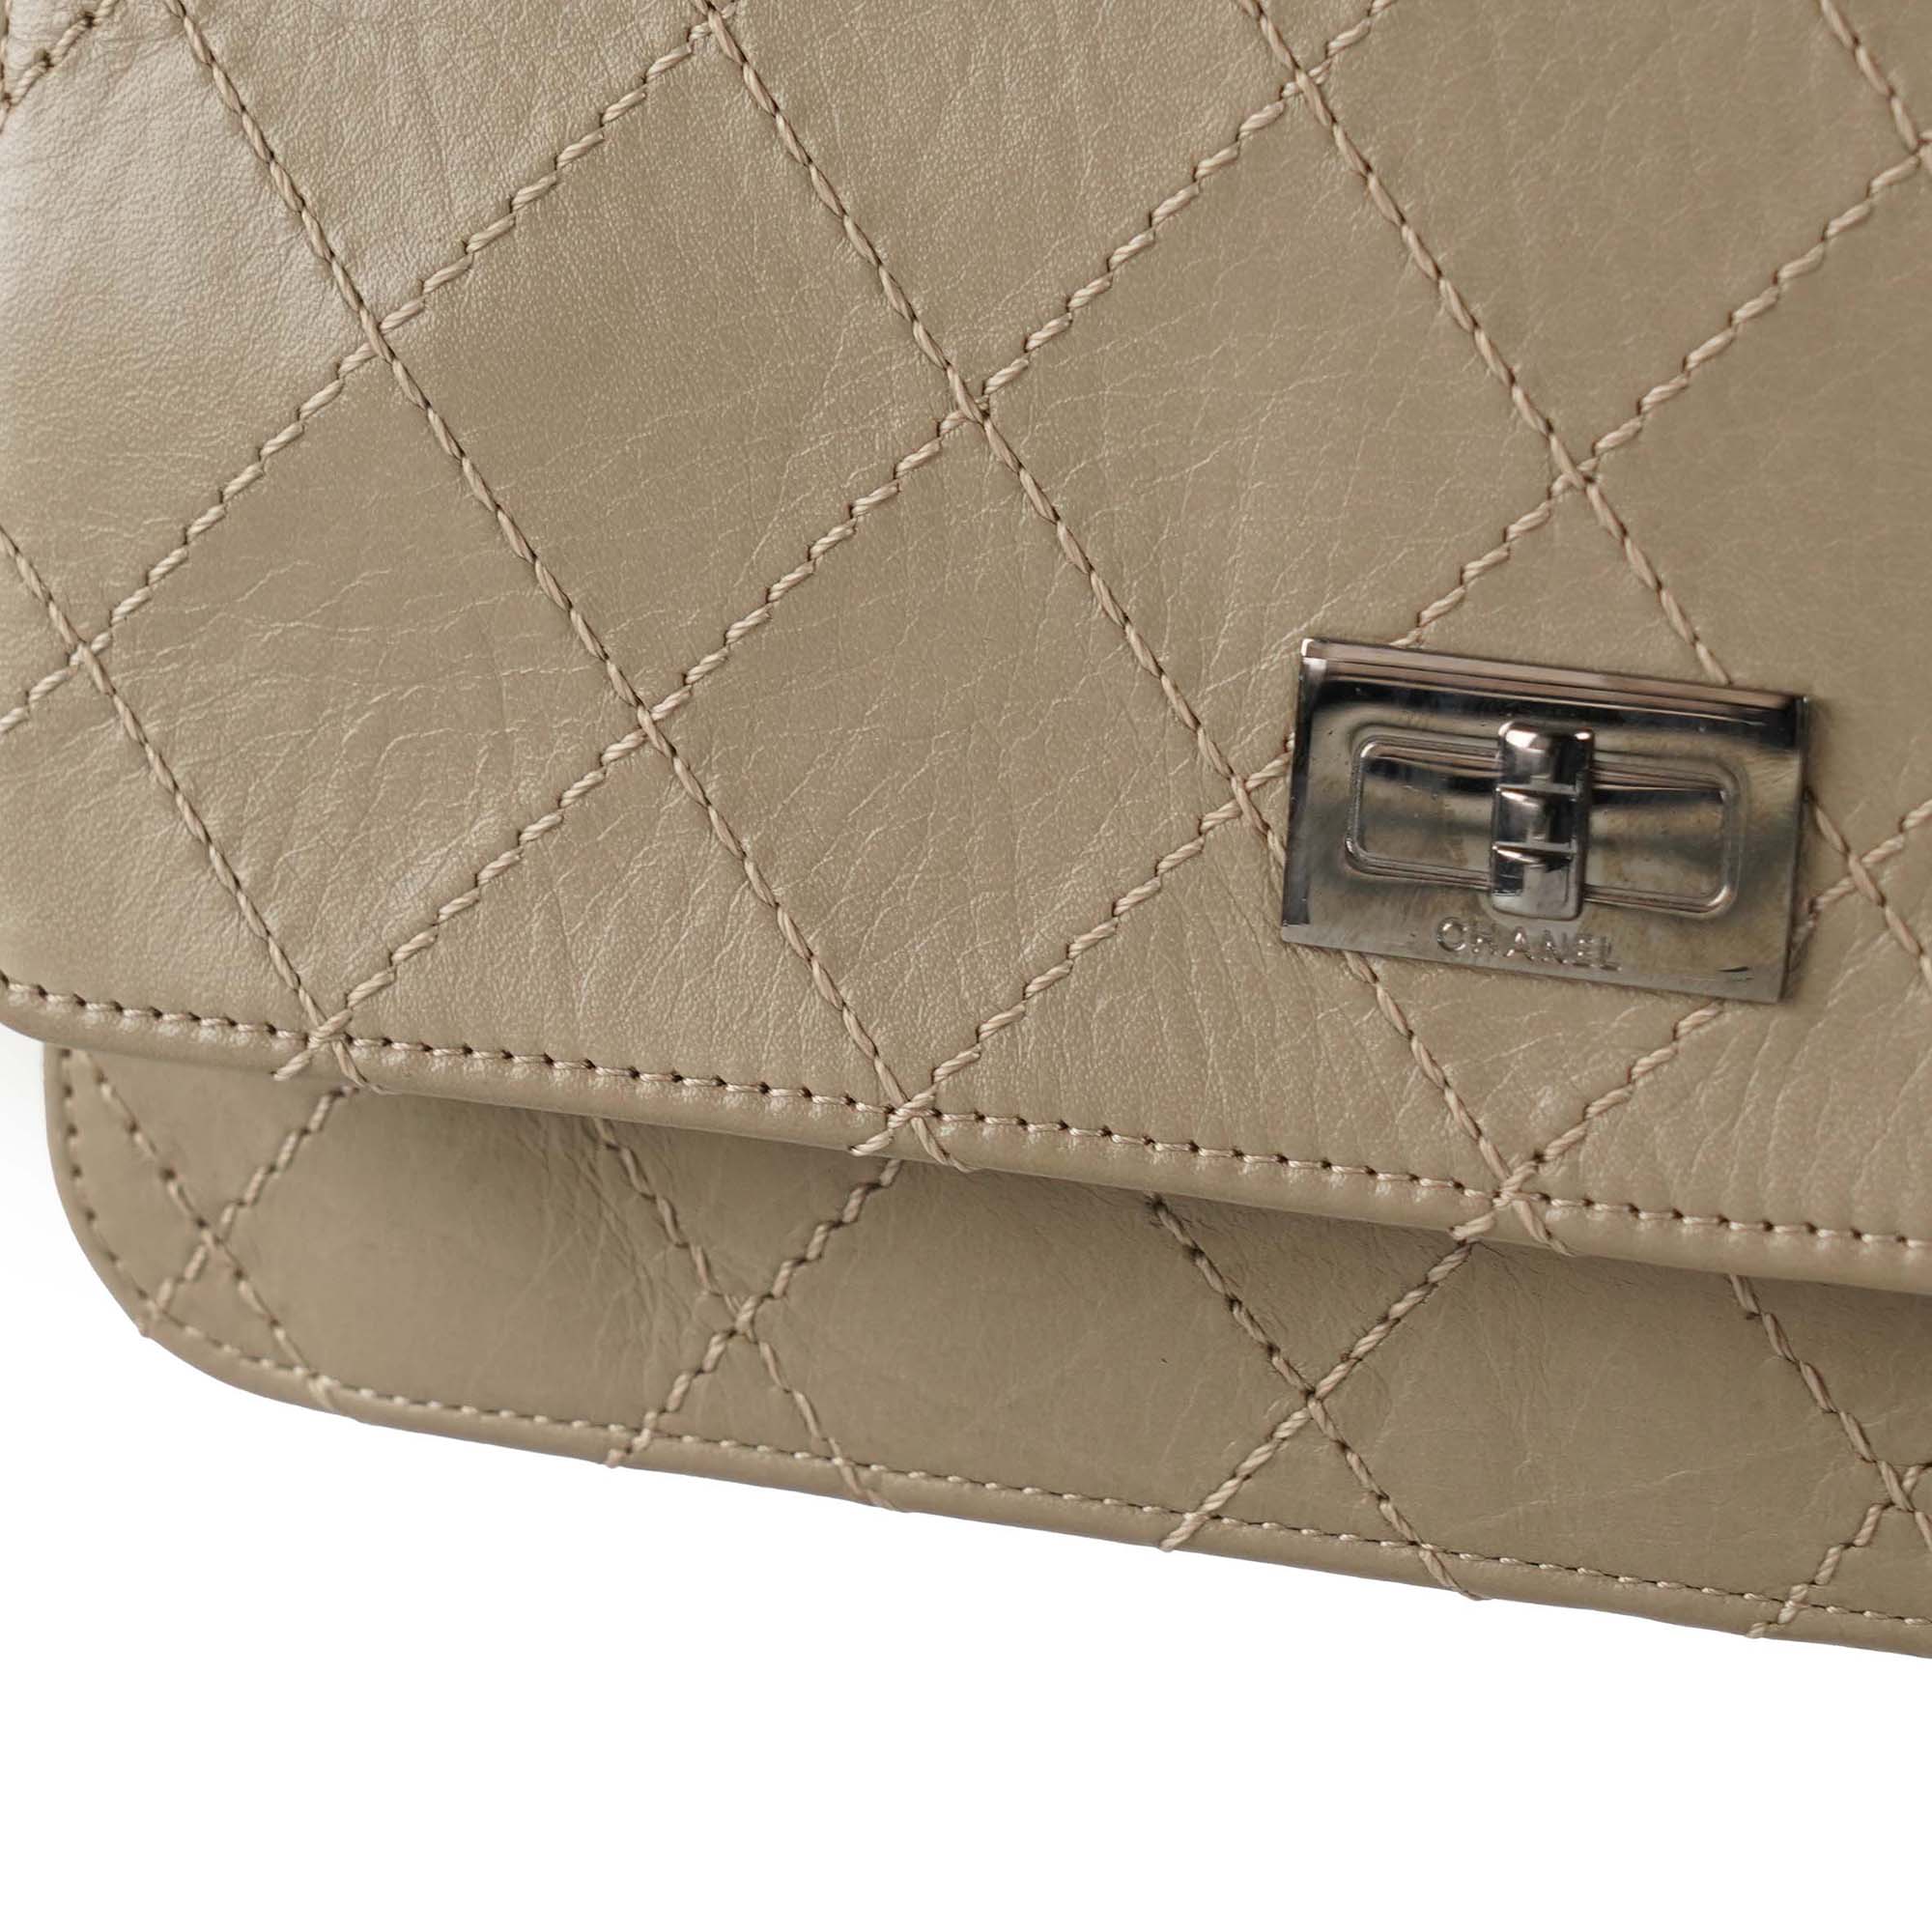 Chanel - Grey Quilted Calfskin Leather Wallet on Chain Bag 